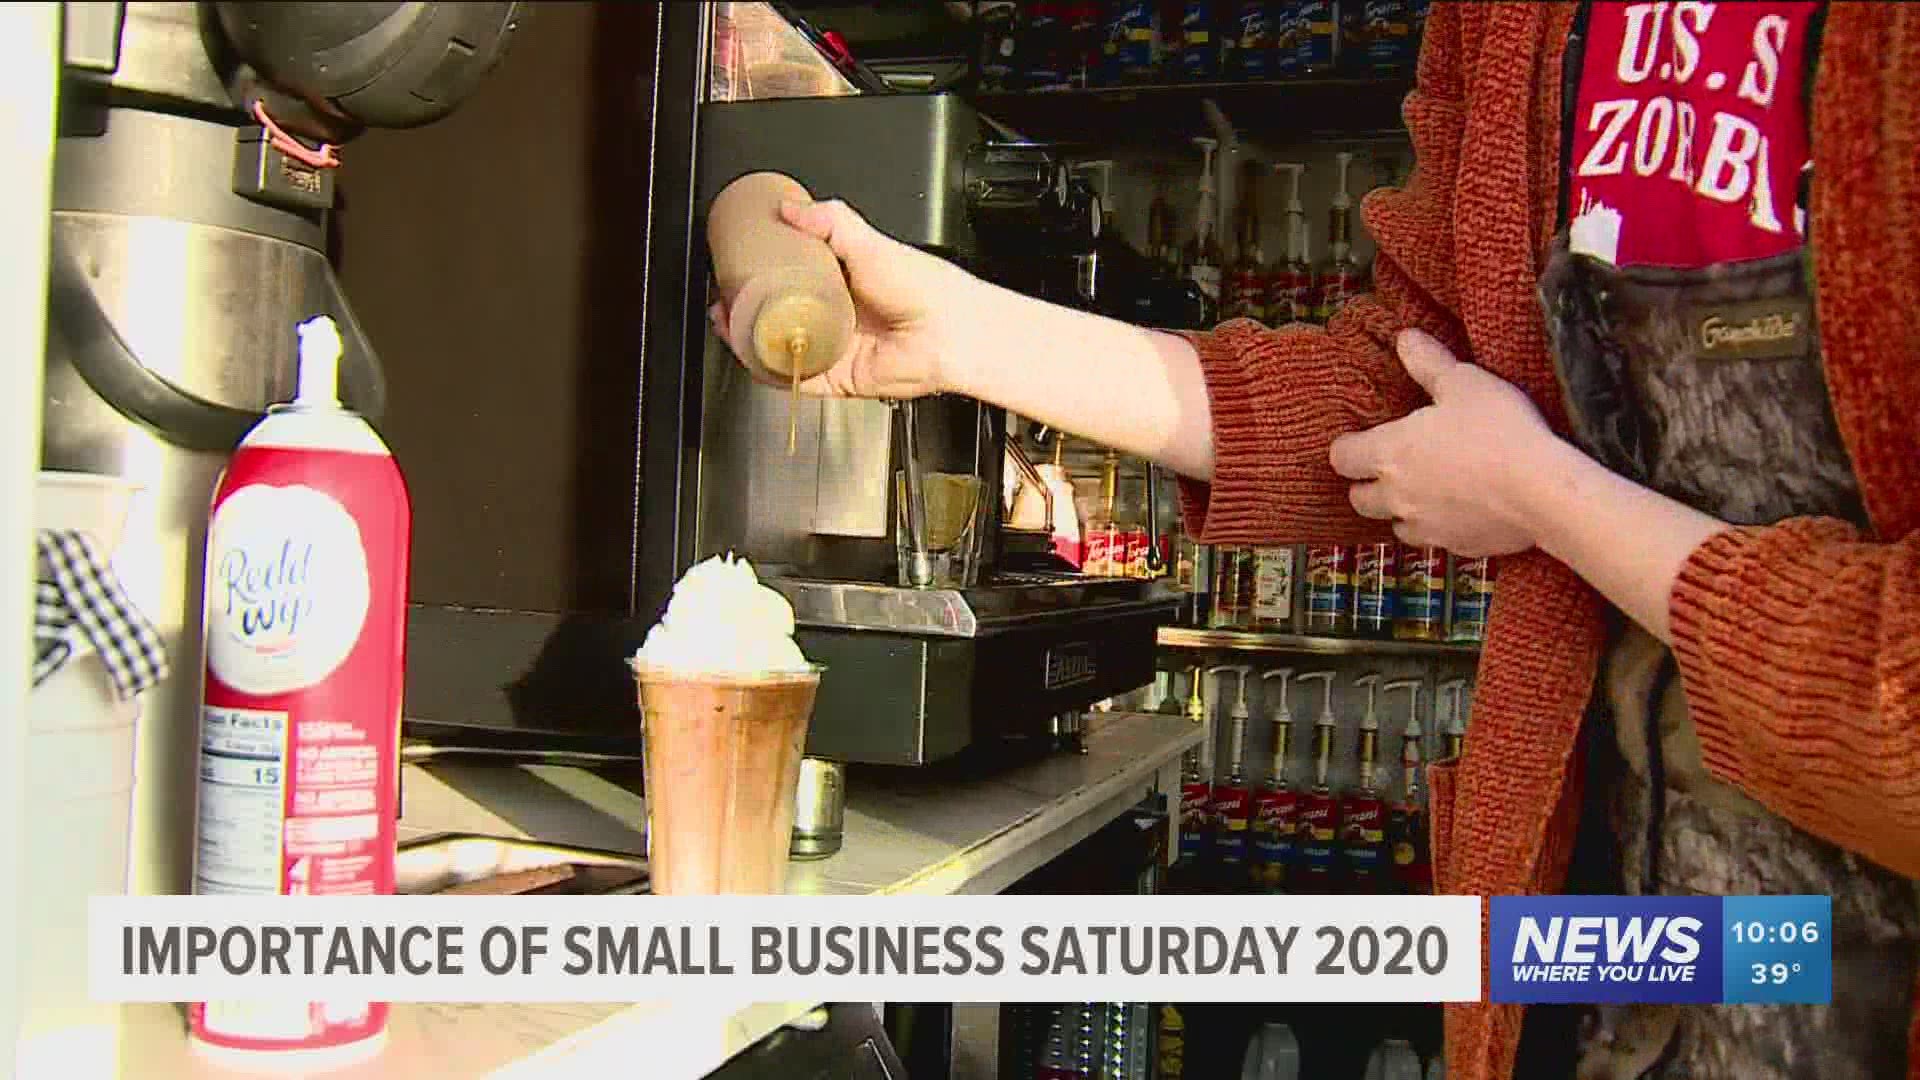 A local coffee shop owner in West Fork hopes Small Business Saturday is a rally for small businesses across the country impacted by the coronavirus.